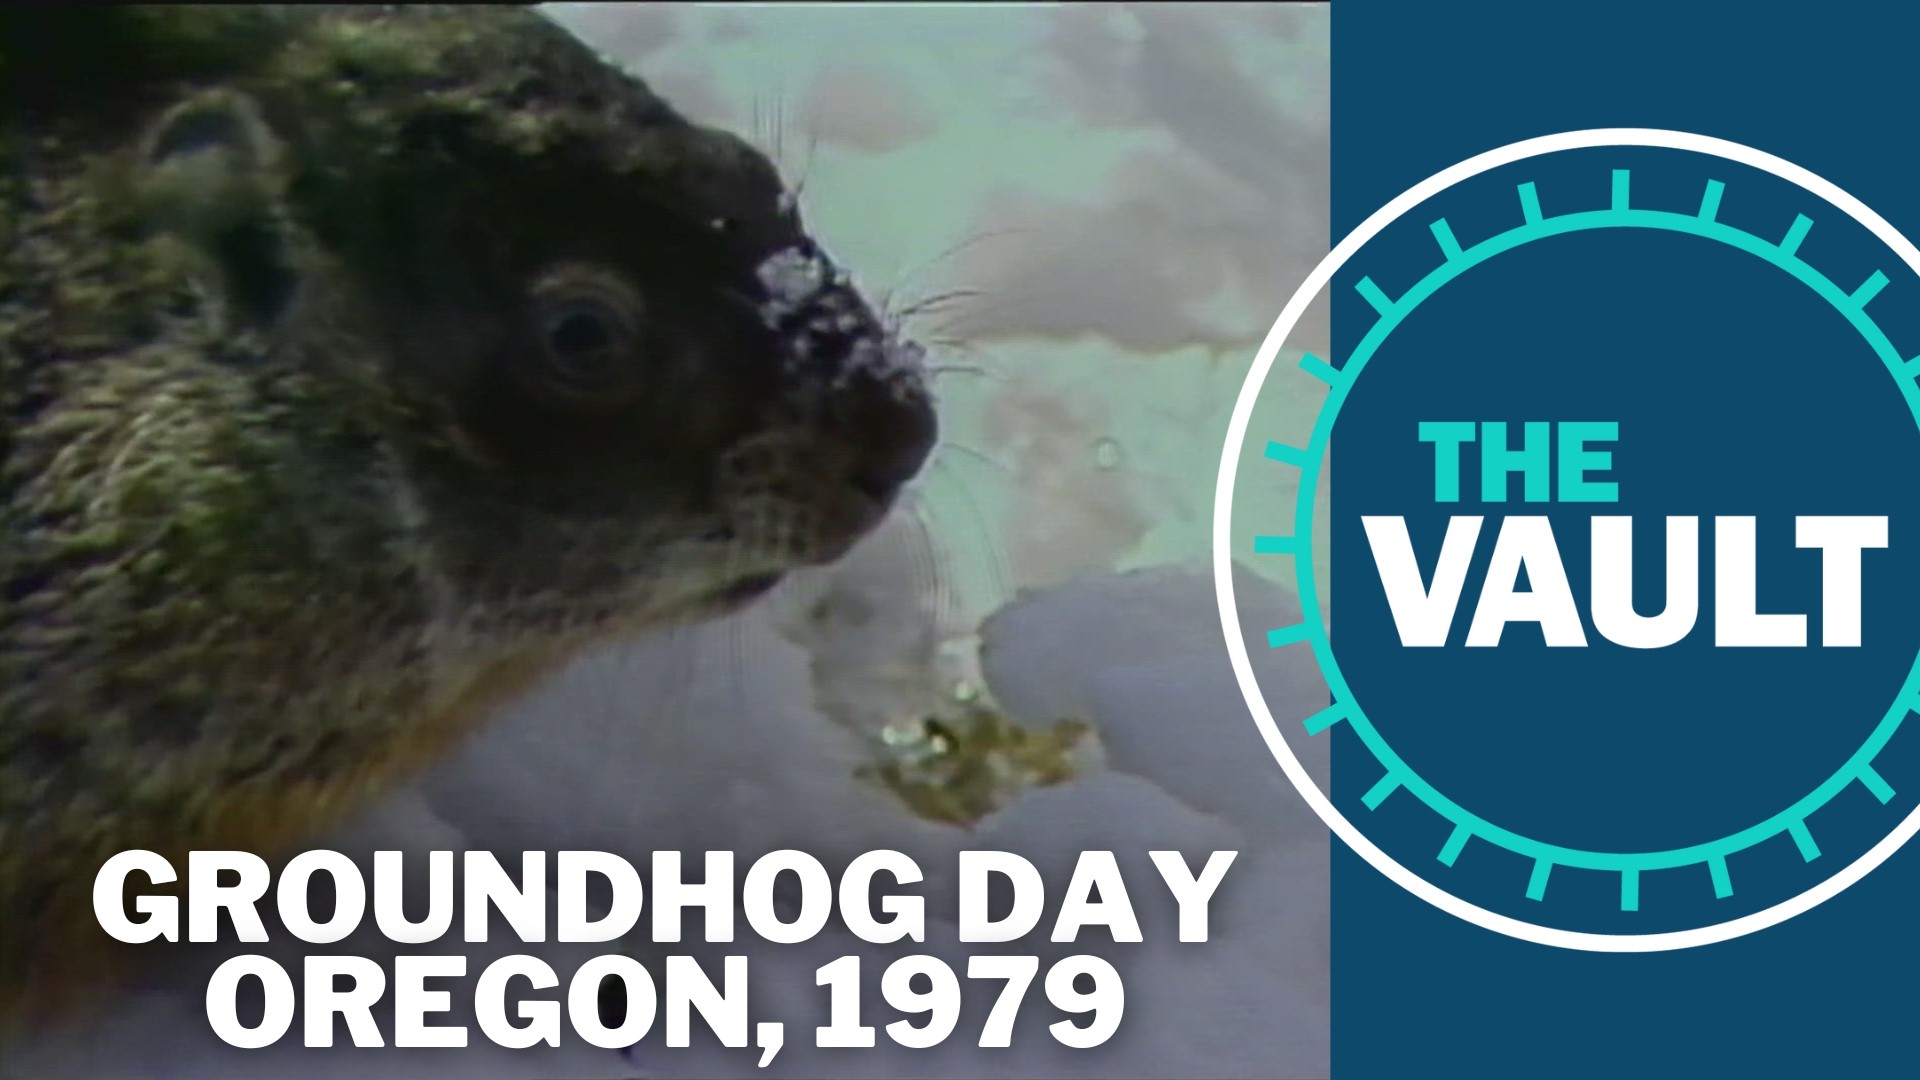 These days, Stumptown Fil does weather prognosticating for the Oregon Zoo. But back in '79, it was a groundhog named Chuck who provided that valuable service.